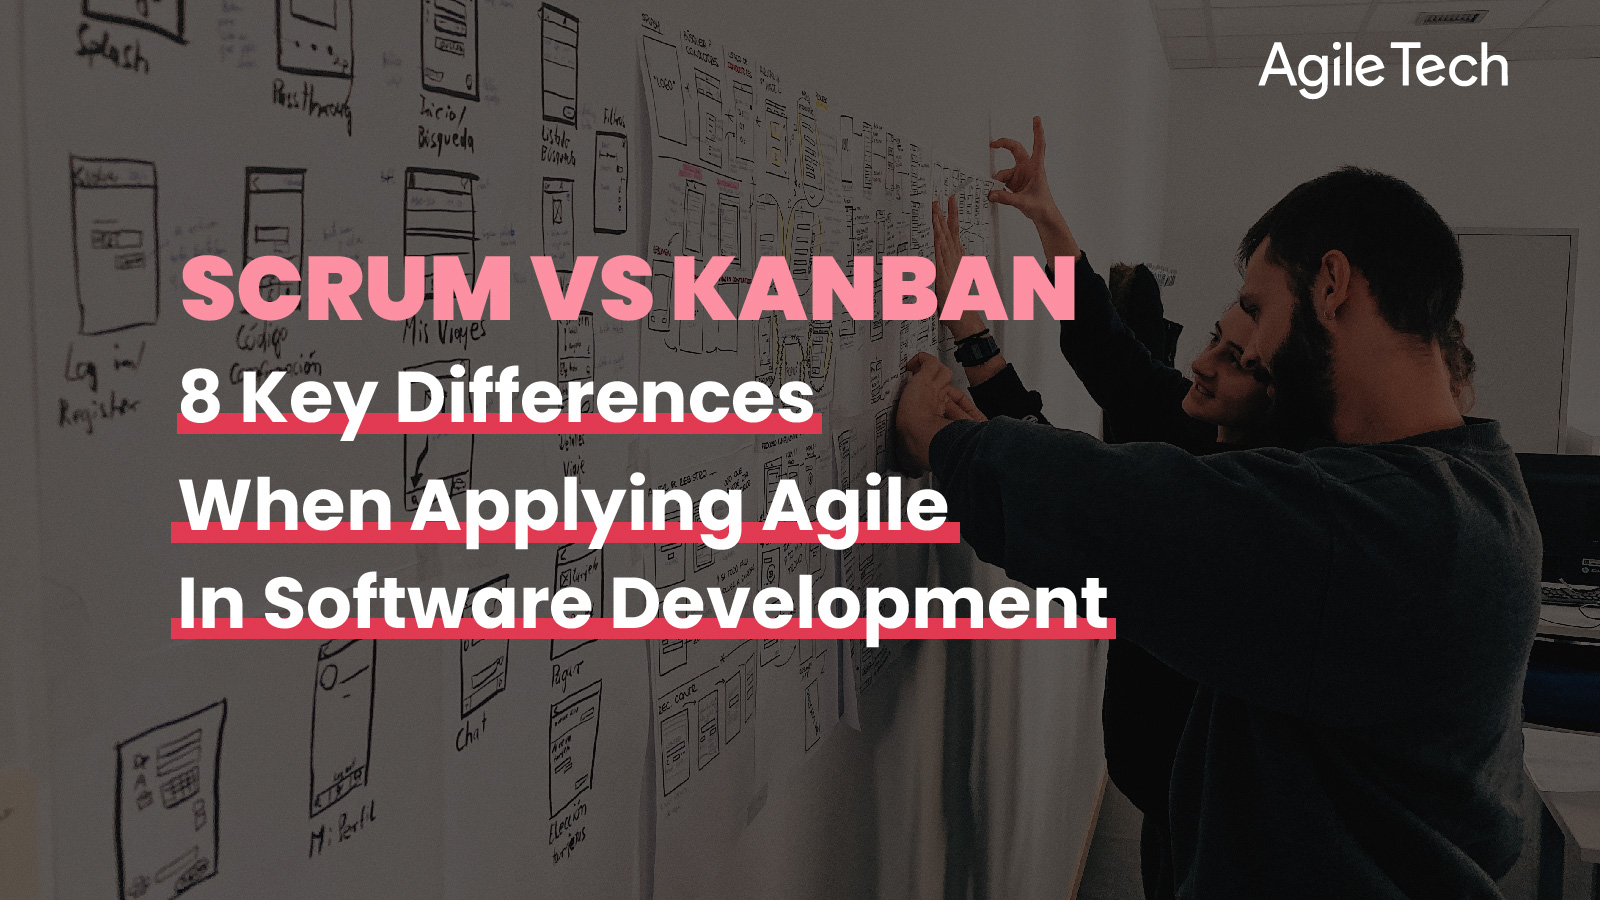 scrum vs kanban, the difference between agile scrum and kanban, scrum vs kanban which is better, agile sdlc